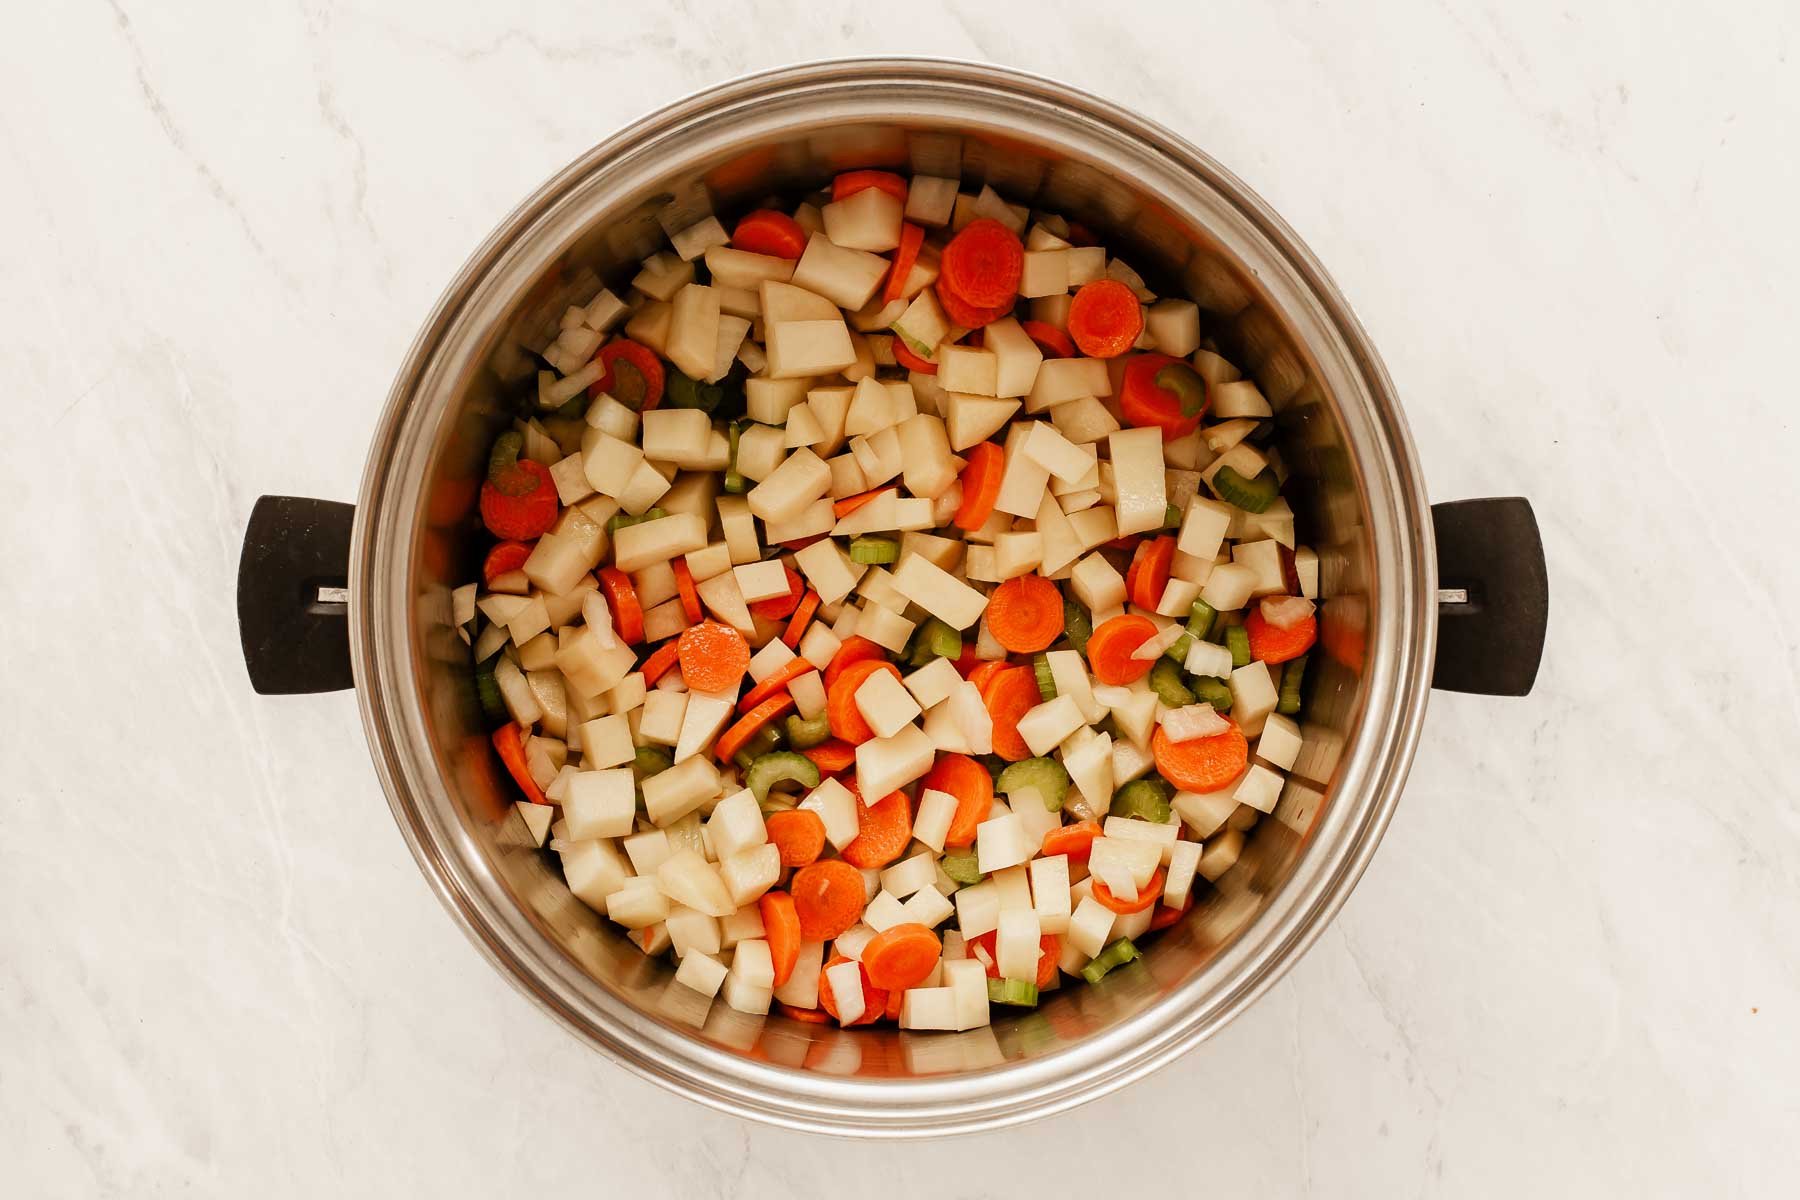 Large soup pot cooking cubed veggies in olive oil.